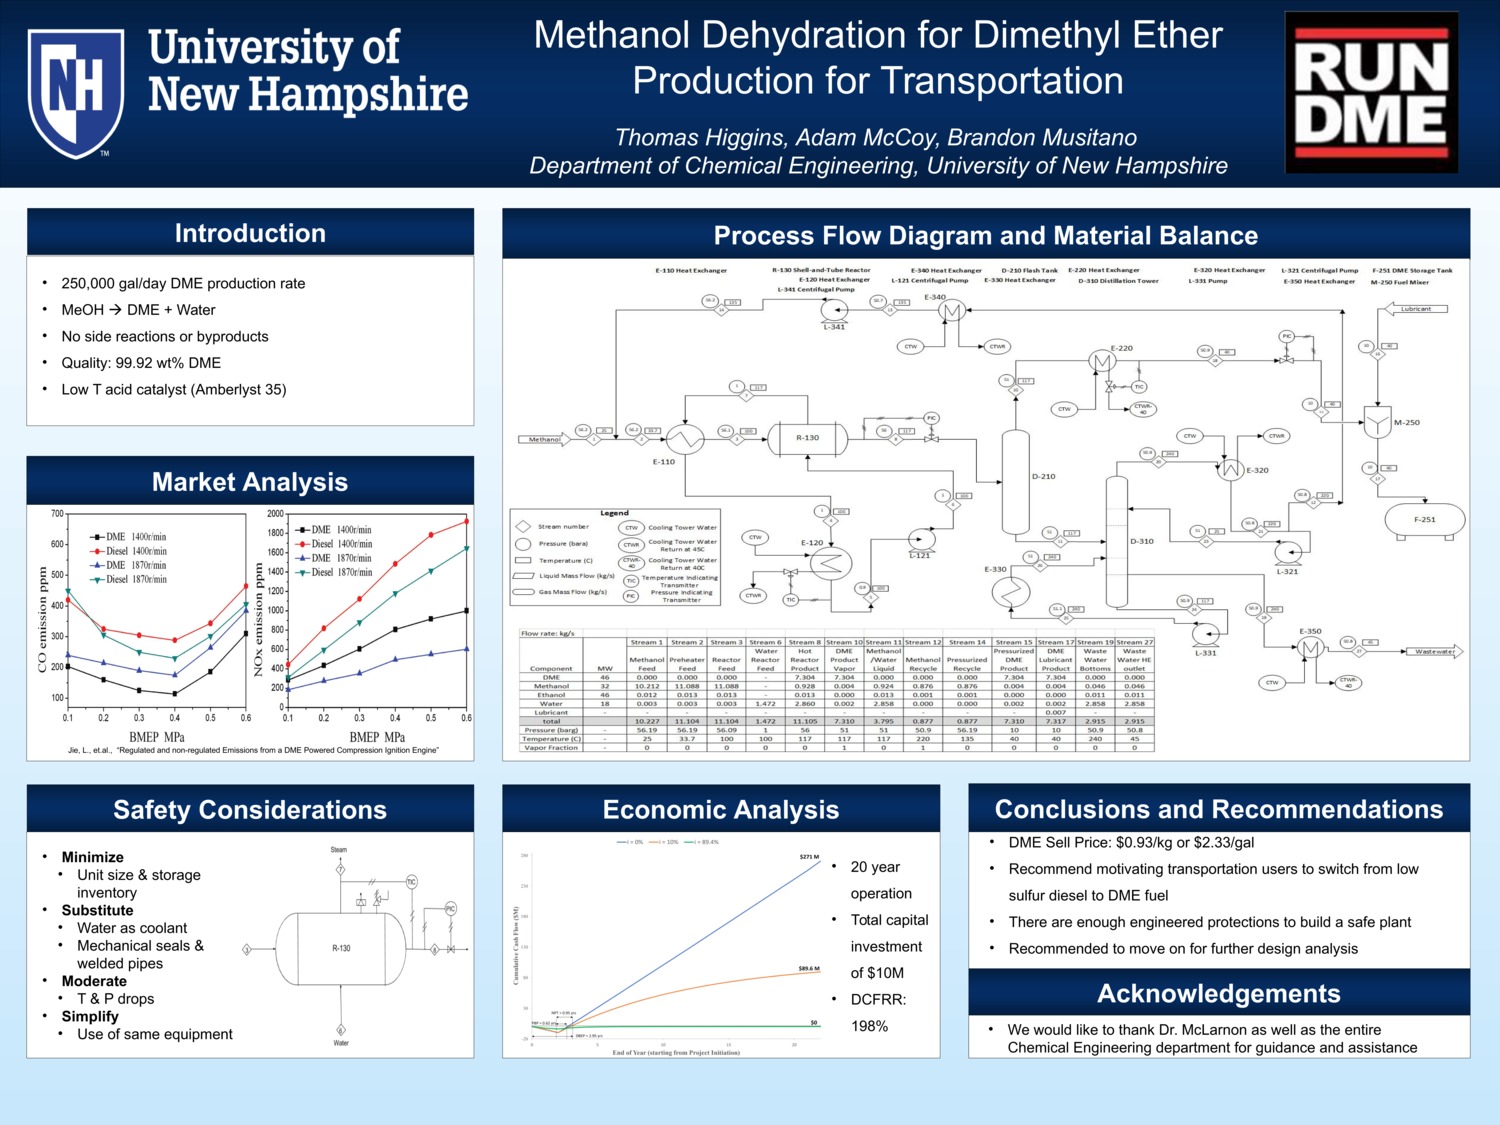 Methanol Dehydration For Dimethyl Ether Production For Transportation by anm2009